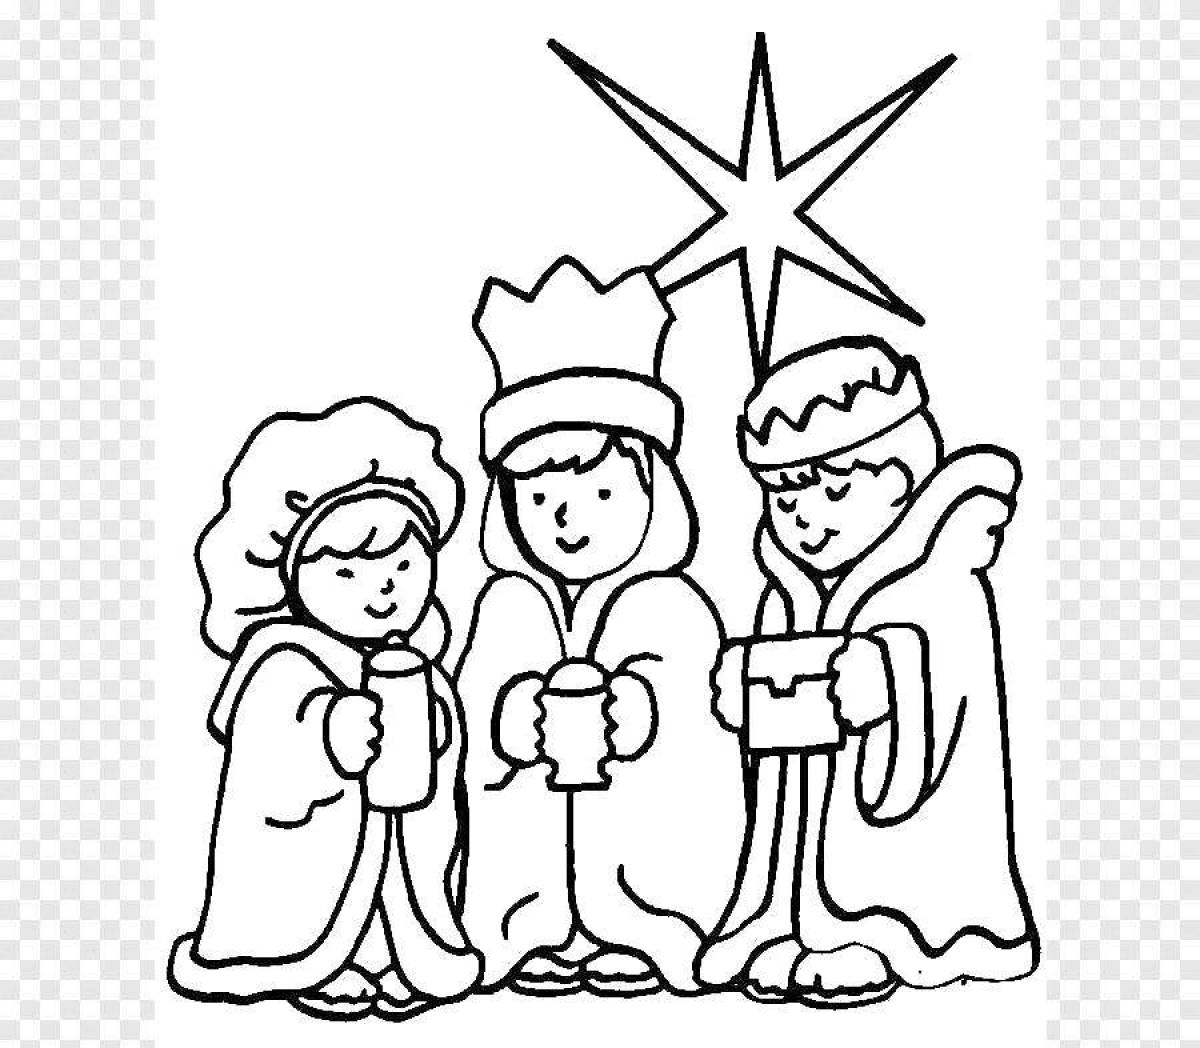 Adorable carol coloring pages for kids